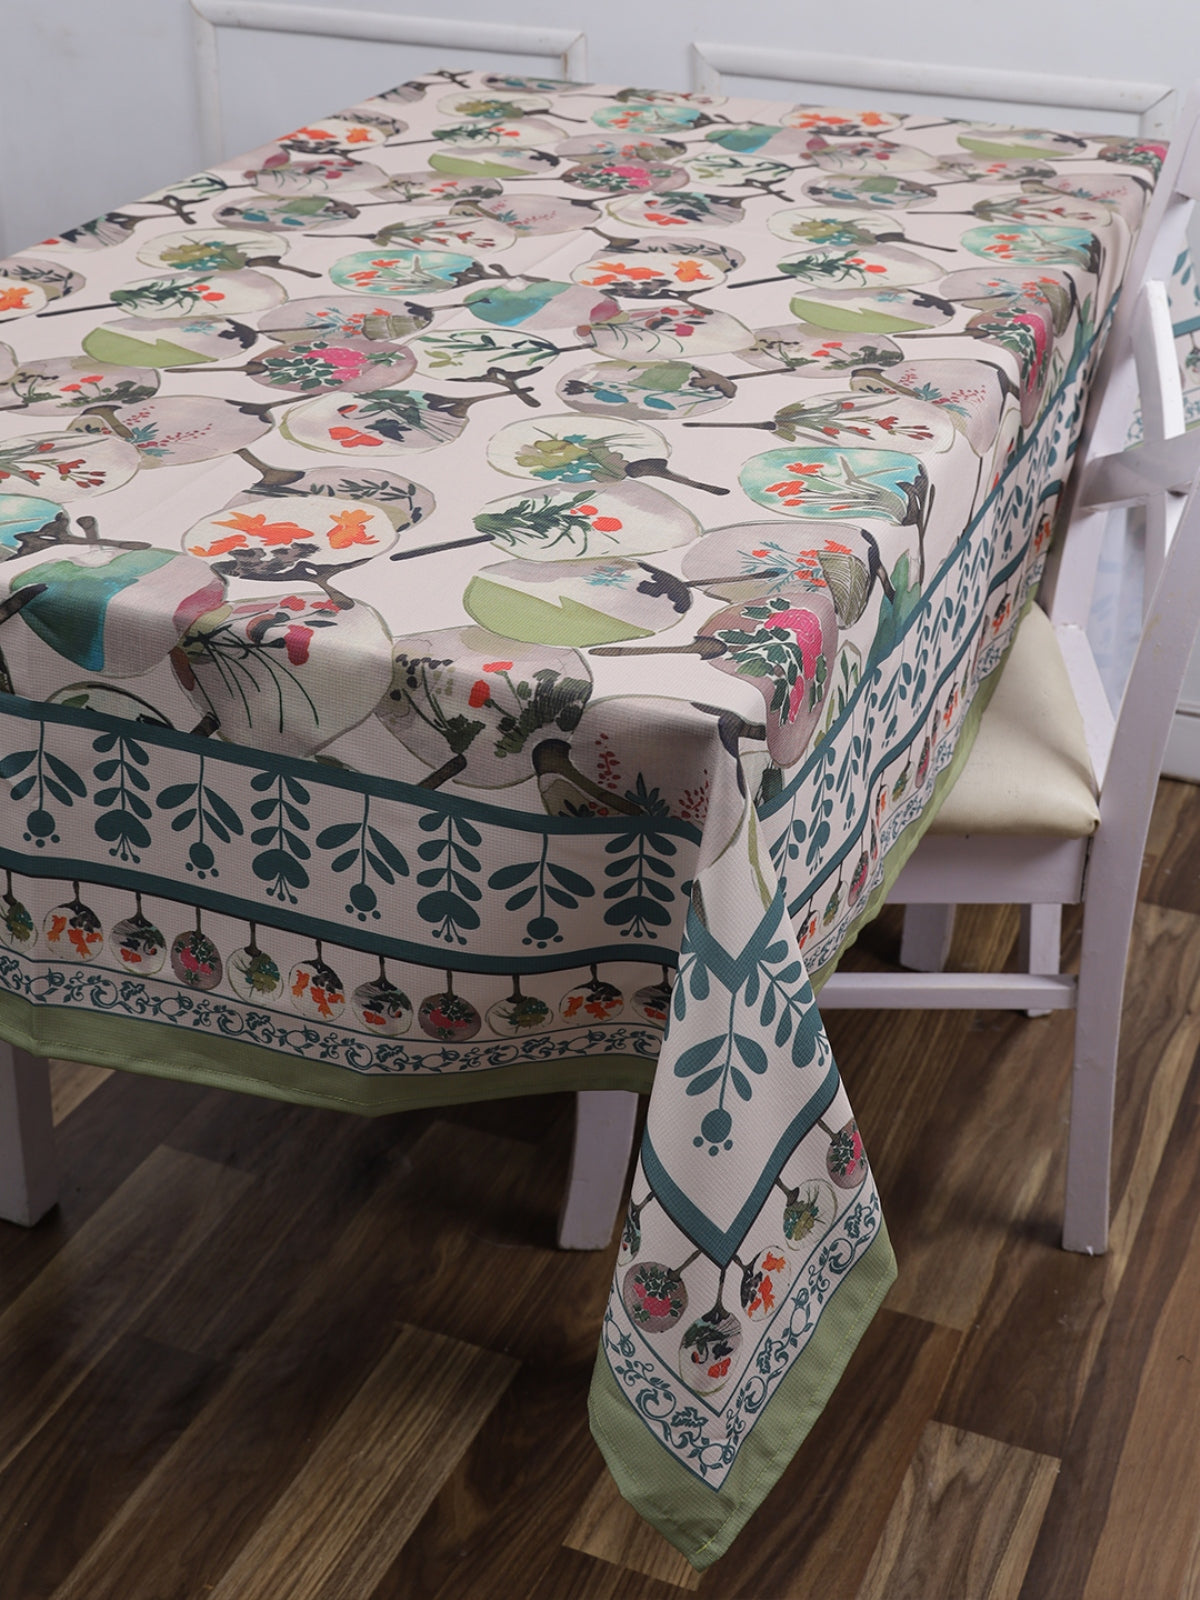 Polyester Floral Printed Dining Table Cover Cloth 60x90 Inch - Beige & Green